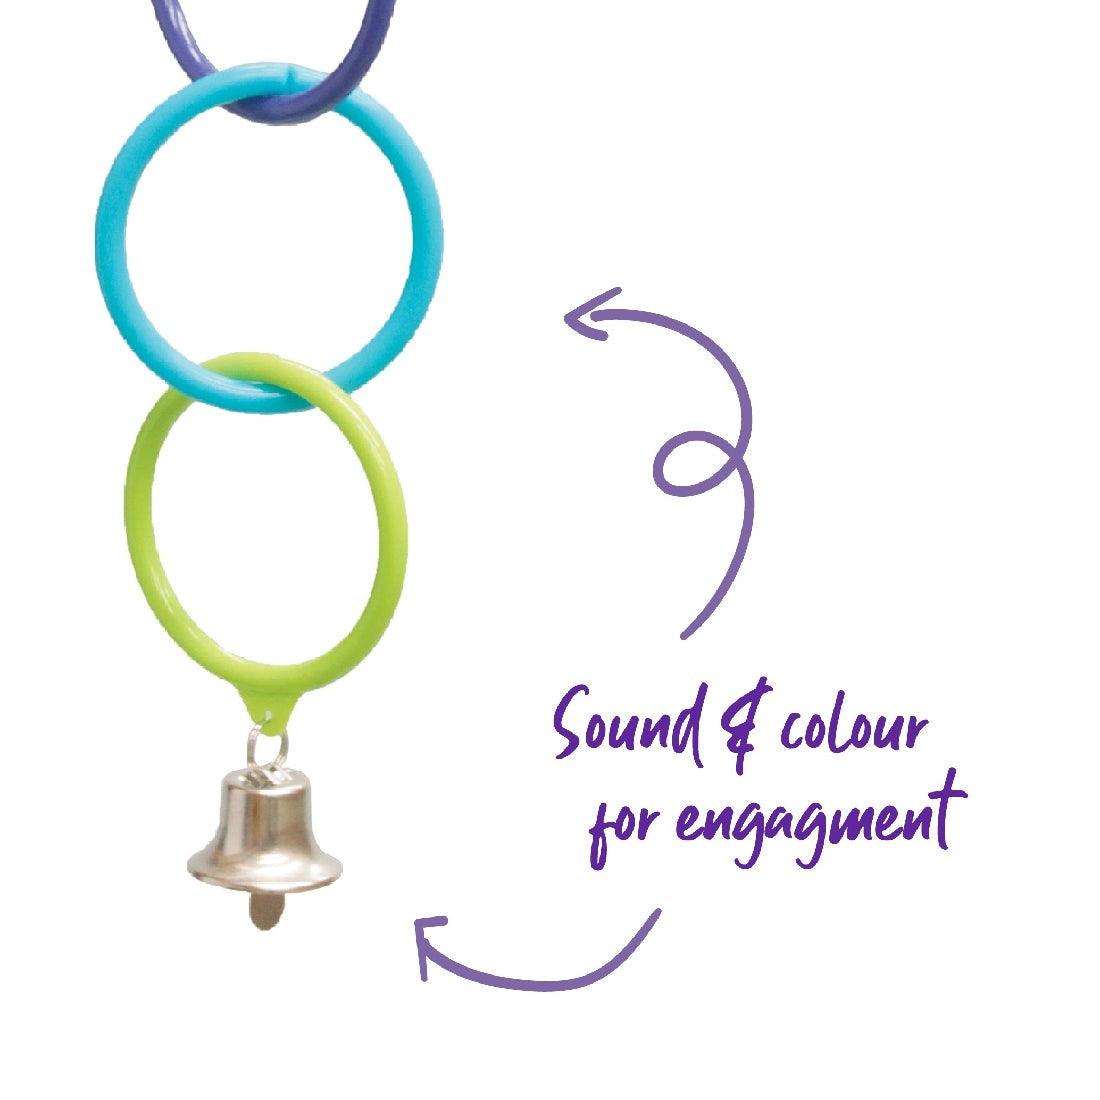 Multicolored plastic rings with bell, bird toy, sound and color engagement.